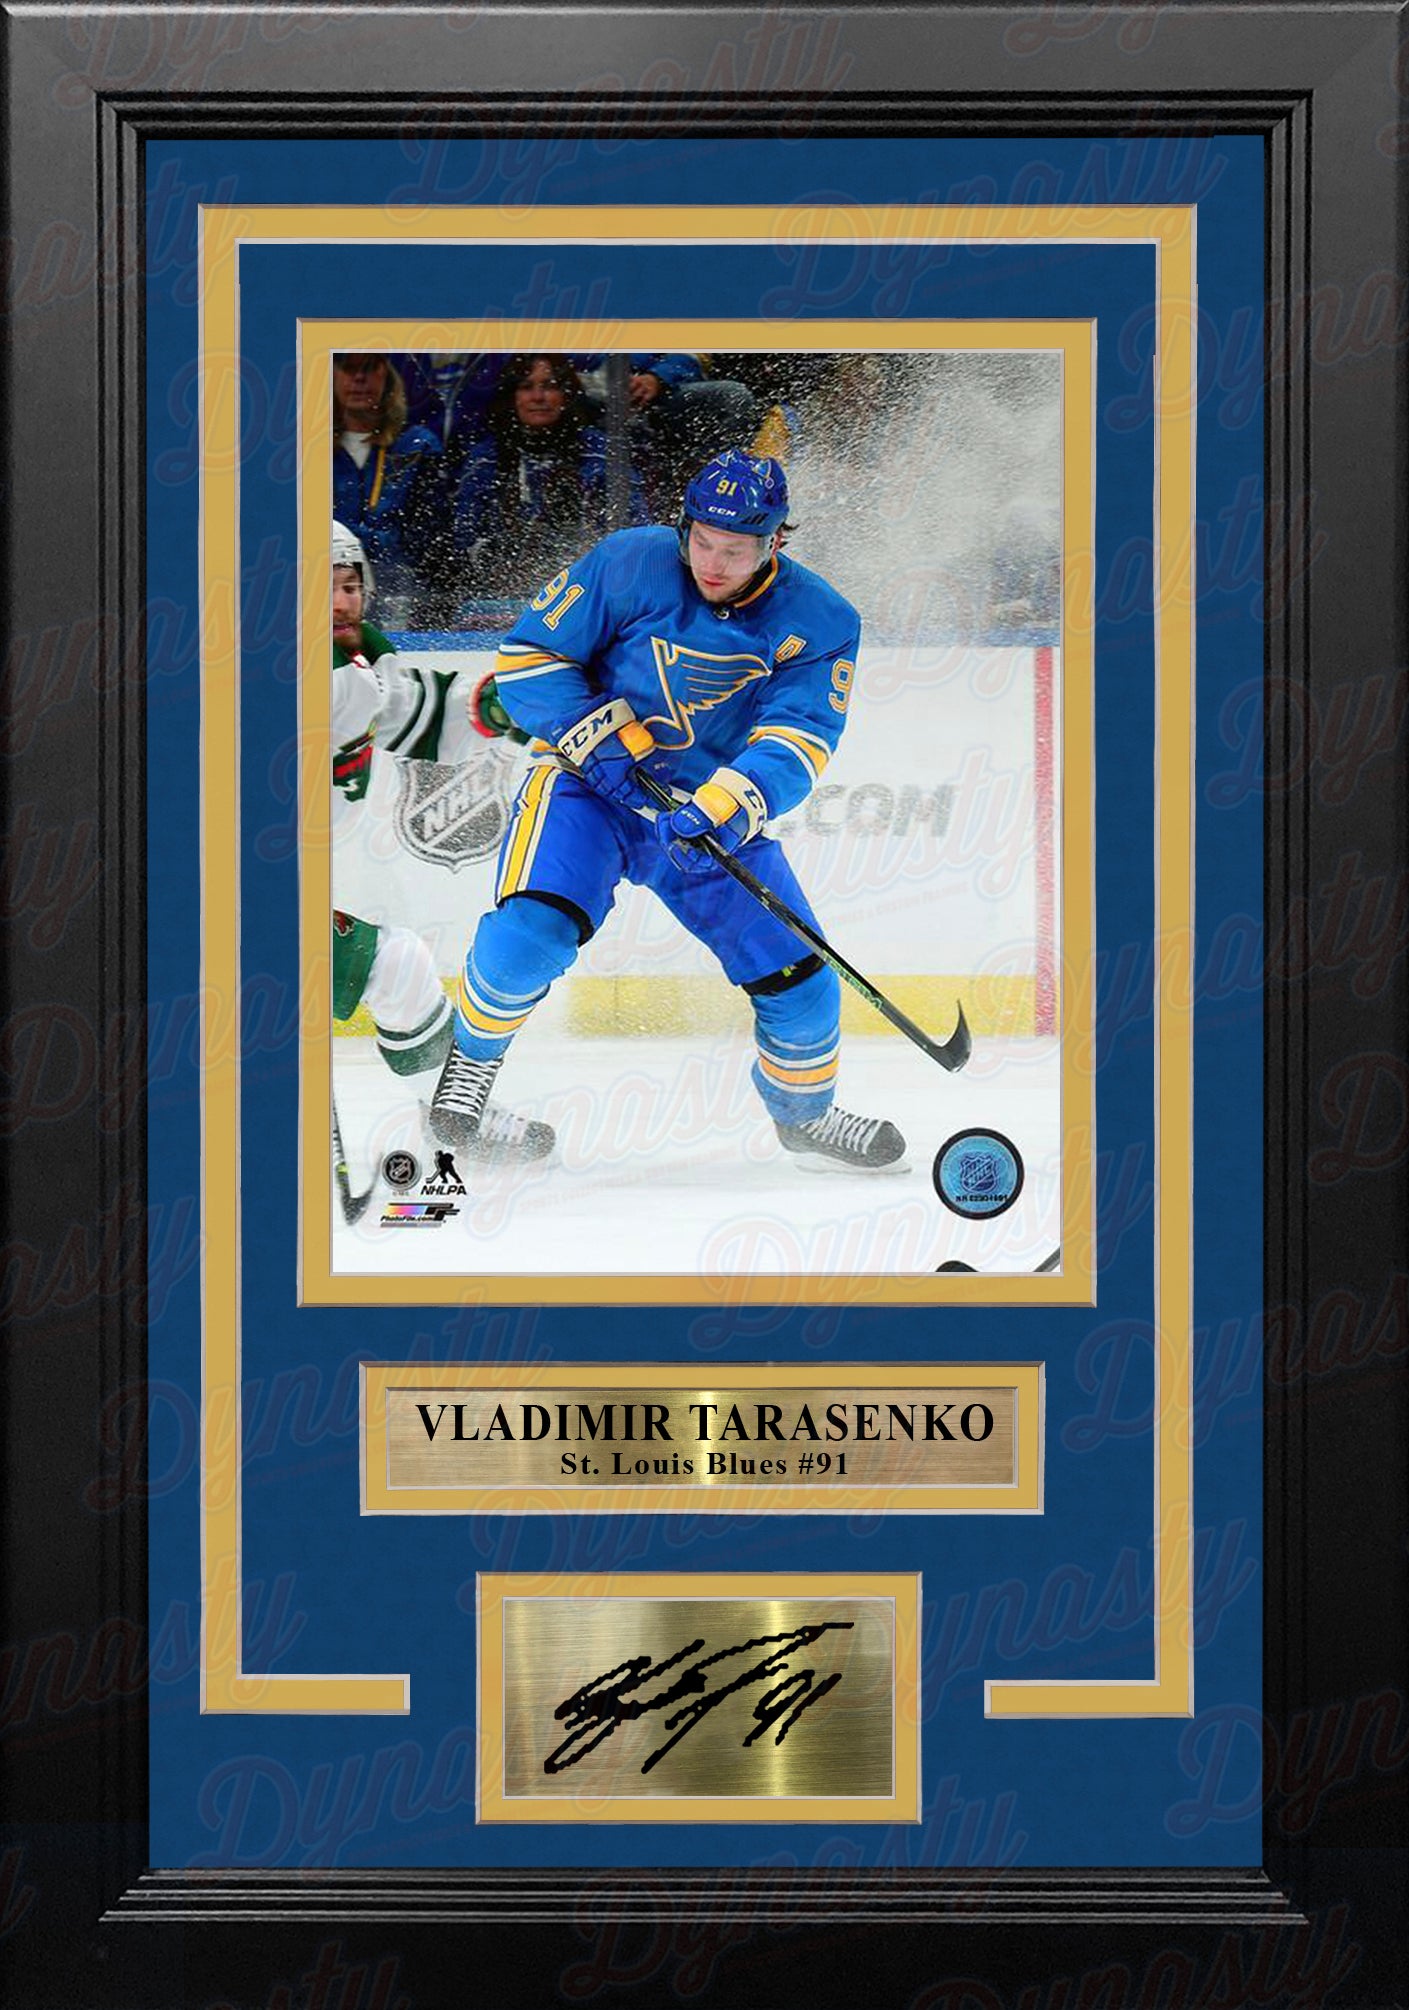 Vladimir Tarasenko St. Louis Blues in Action NHL Hockey 8x10 Framed Photo with Engraved Autograph - Dynasty Sports & Framing 